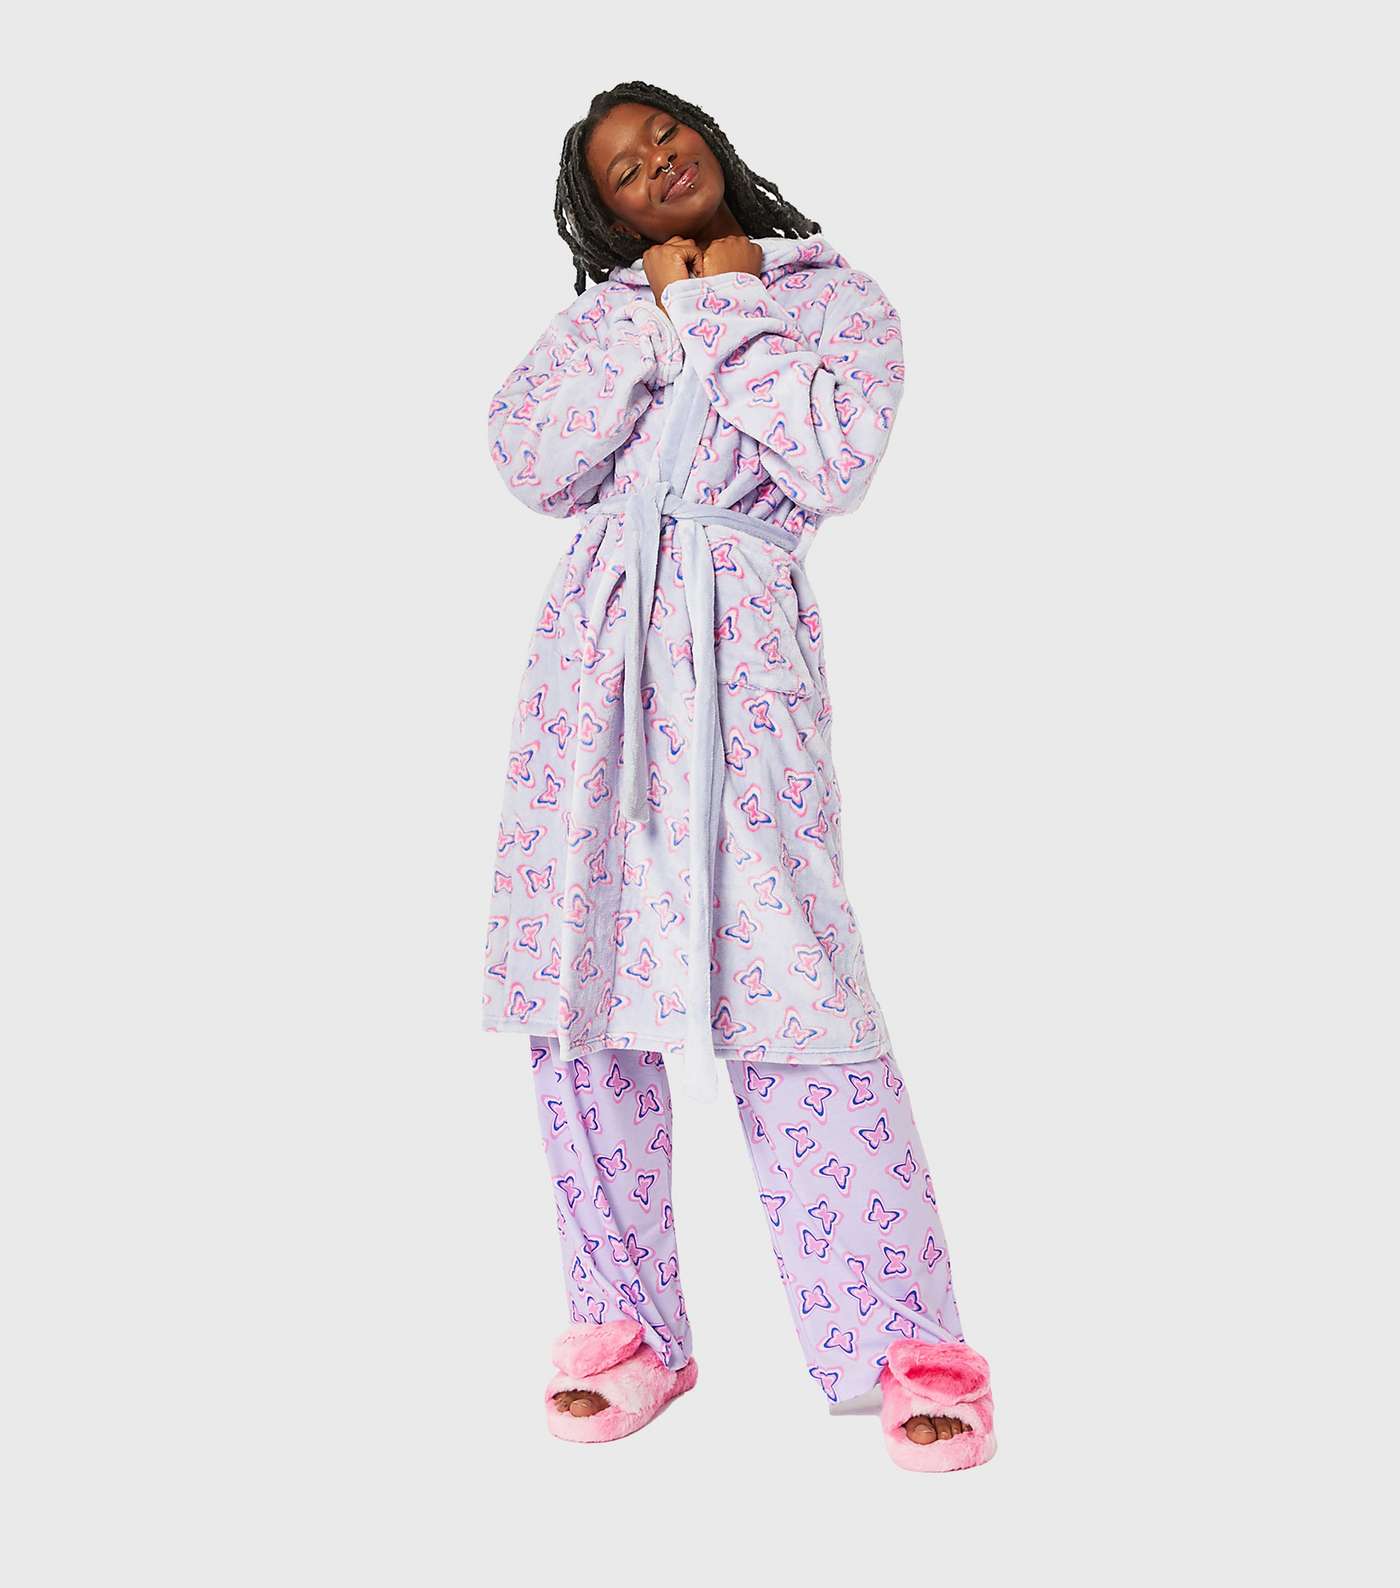 Skinnydip Lilac Butterfly Fleece Hooded Dressing Gown Image 2